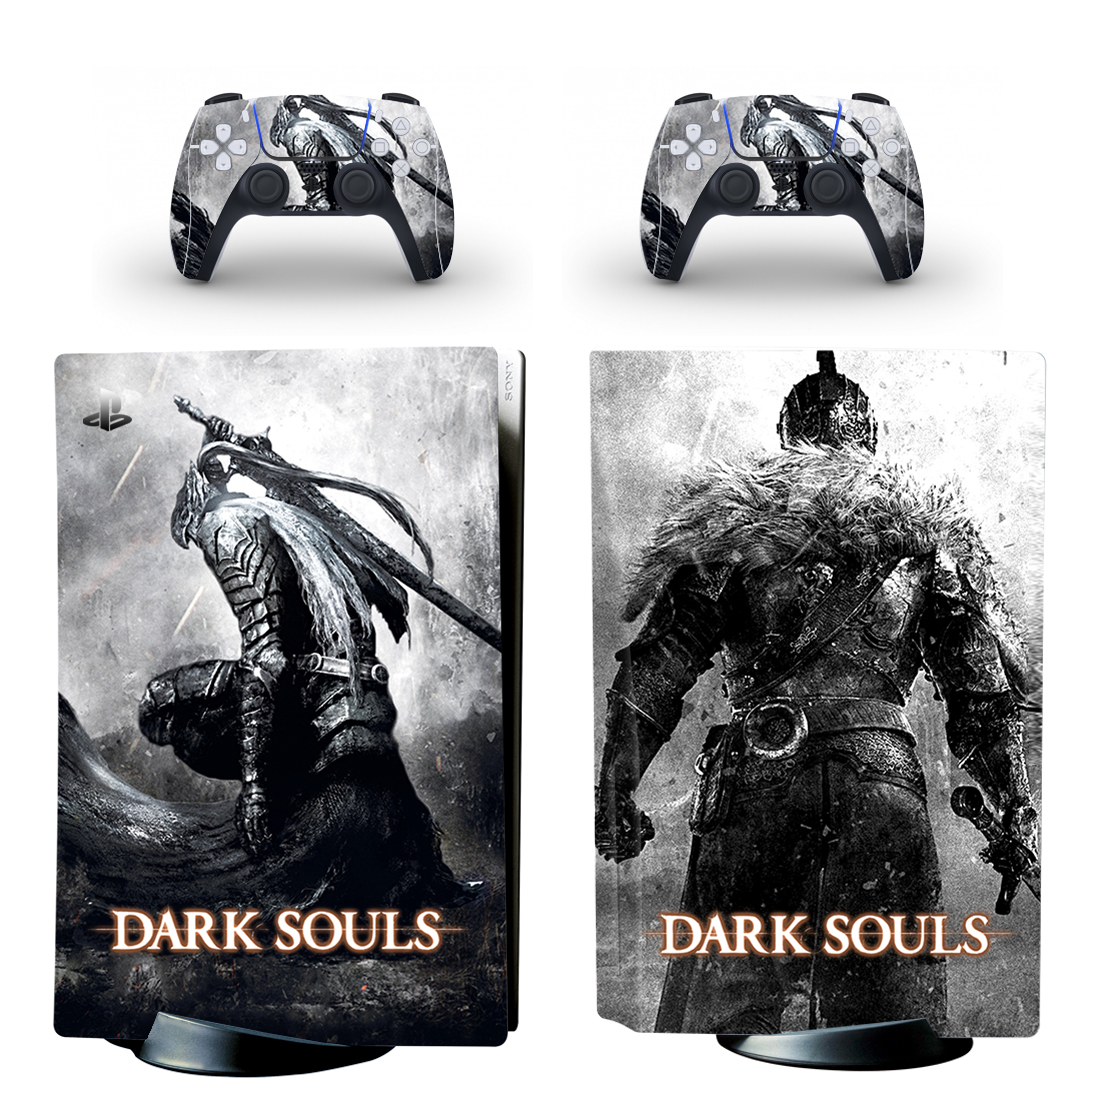 Dark Souls PS5 Skin Sticker For PlayStation 5 And Controllers